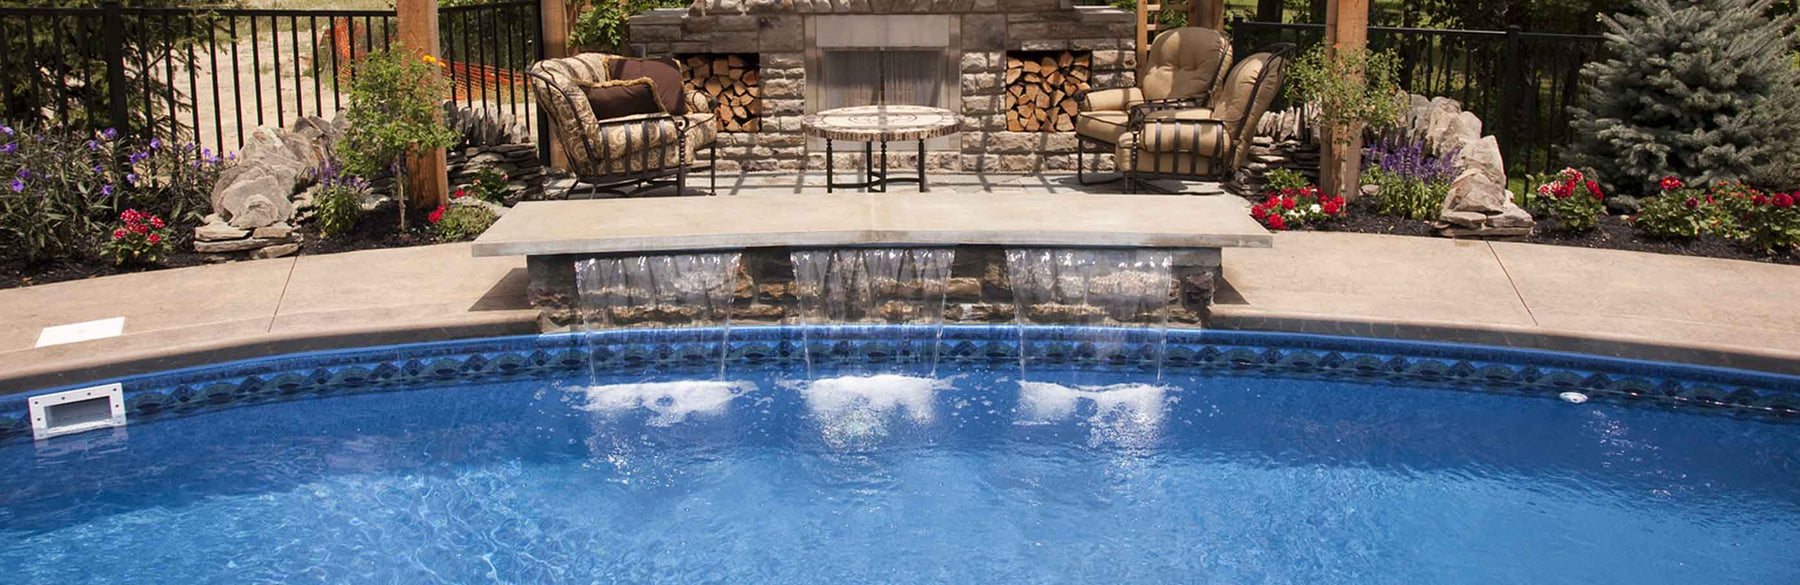 7 Steps From Boring To Better: How Pools Are Made - Great Backyard Place